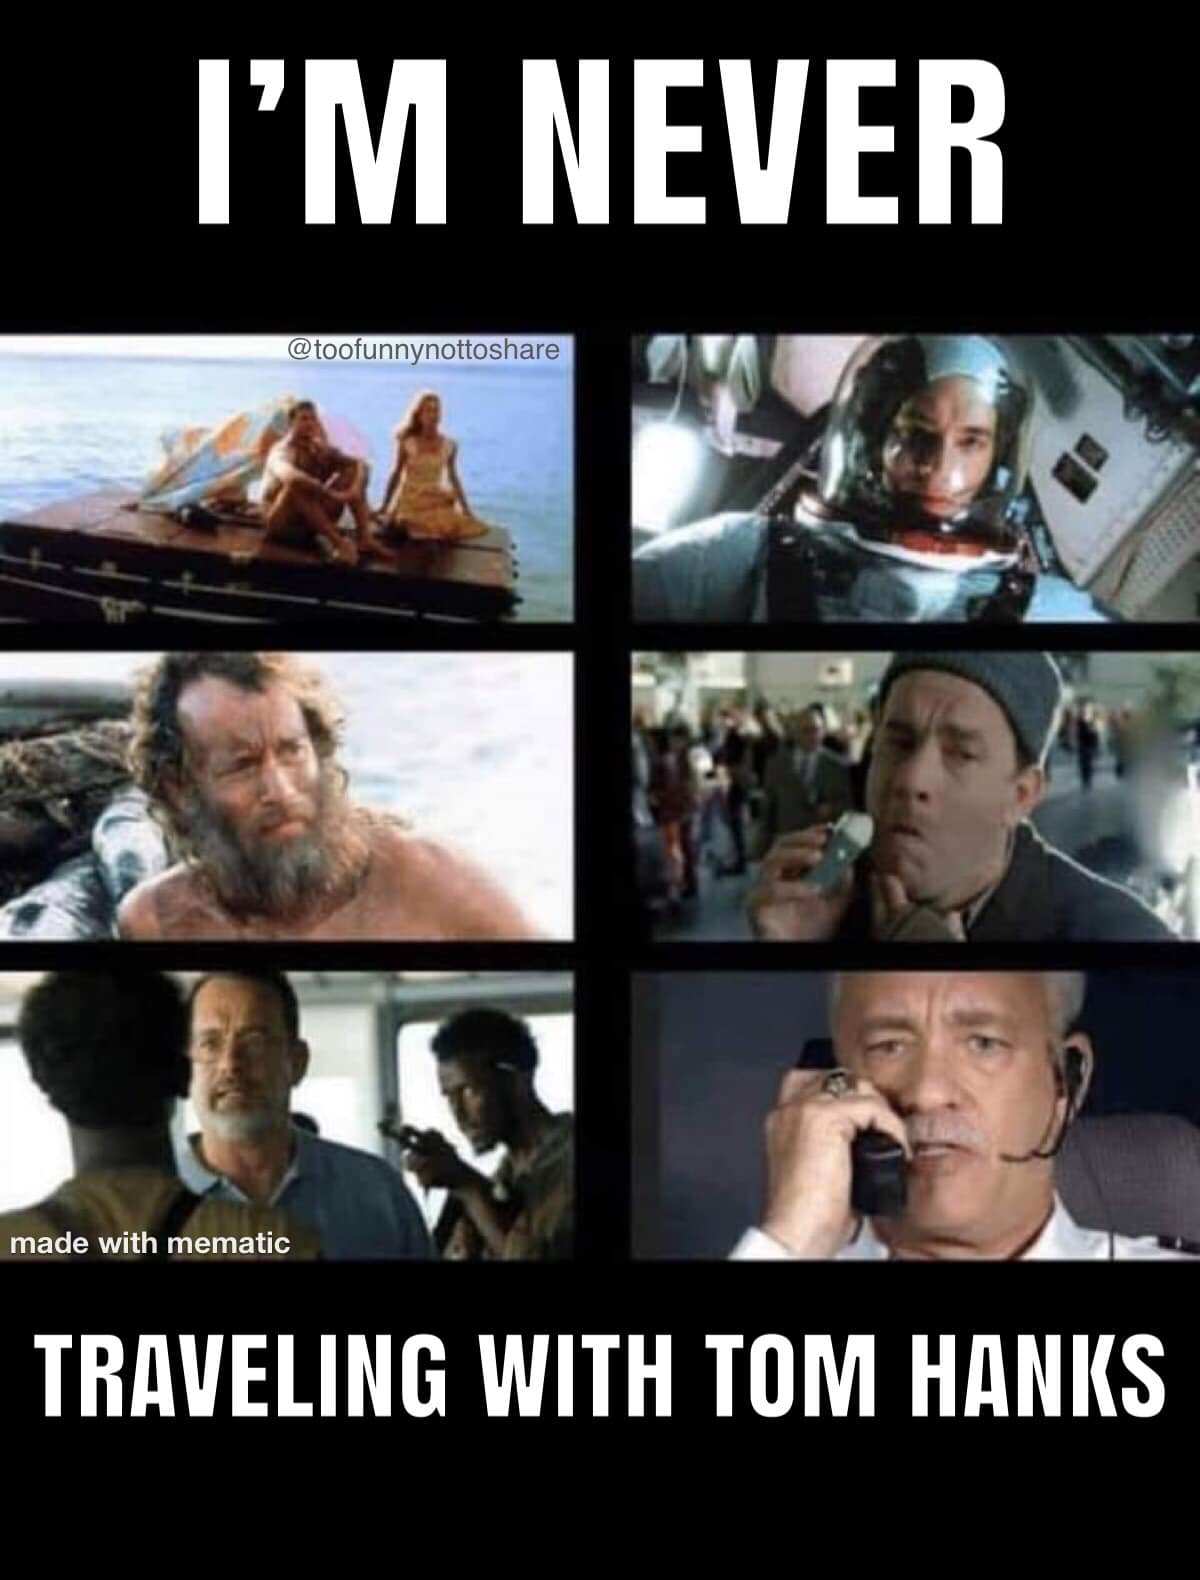 crazy realizations - never travel with tom hanks - I'M Never made with mematic Traveling With Tom Hanks